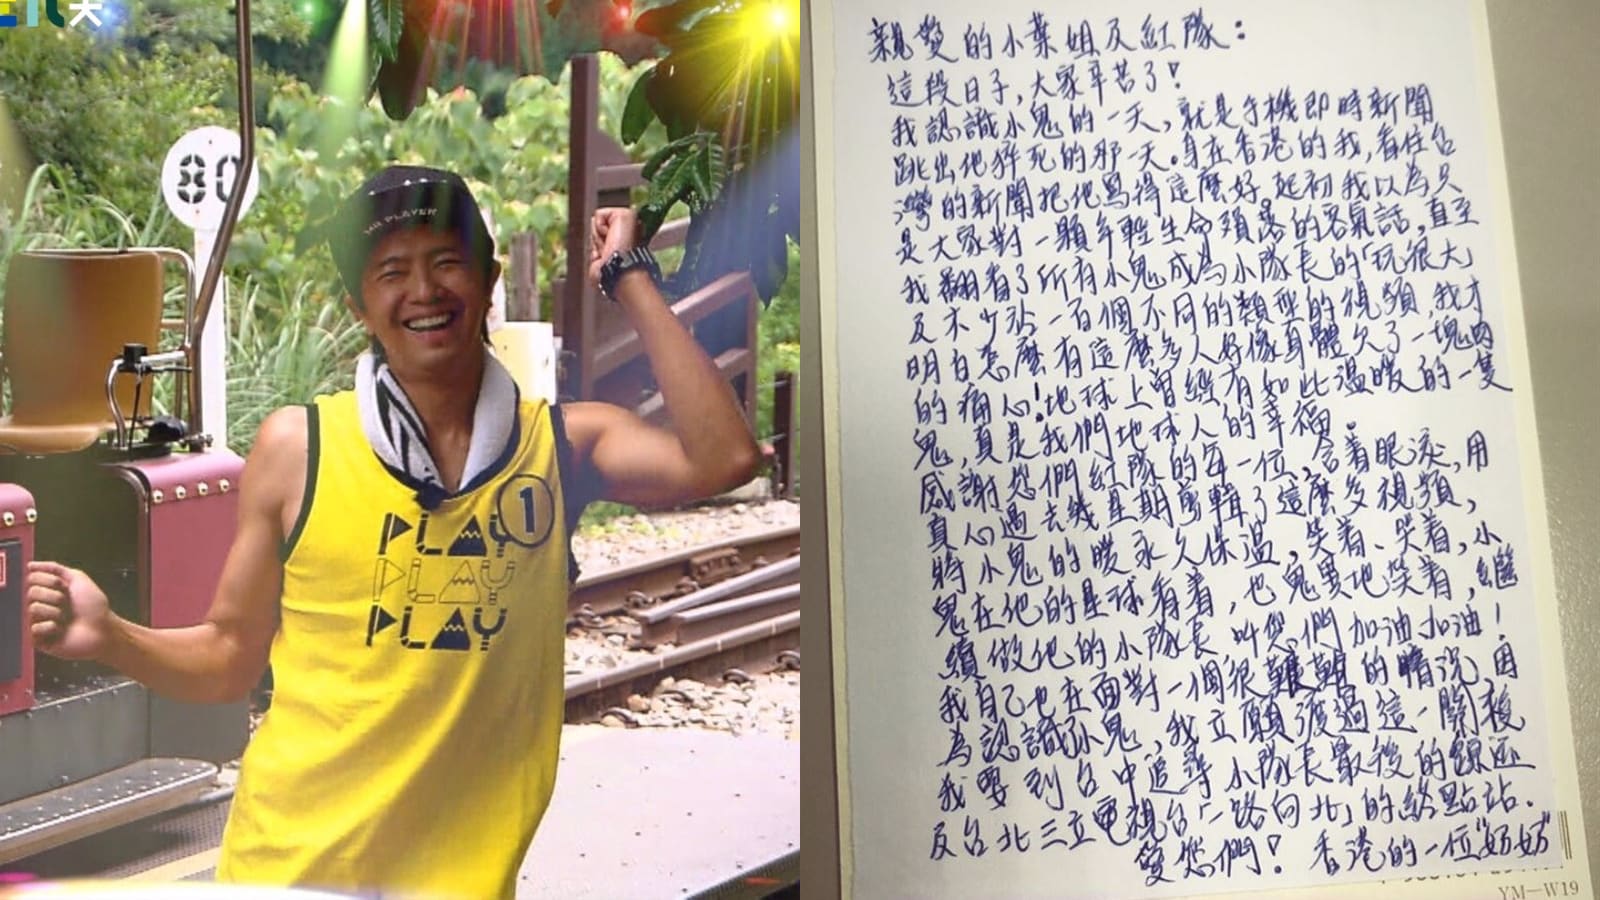 Hongkong Grandma Pens Touching Letter About How Alien Huang Inspired Her After His Death